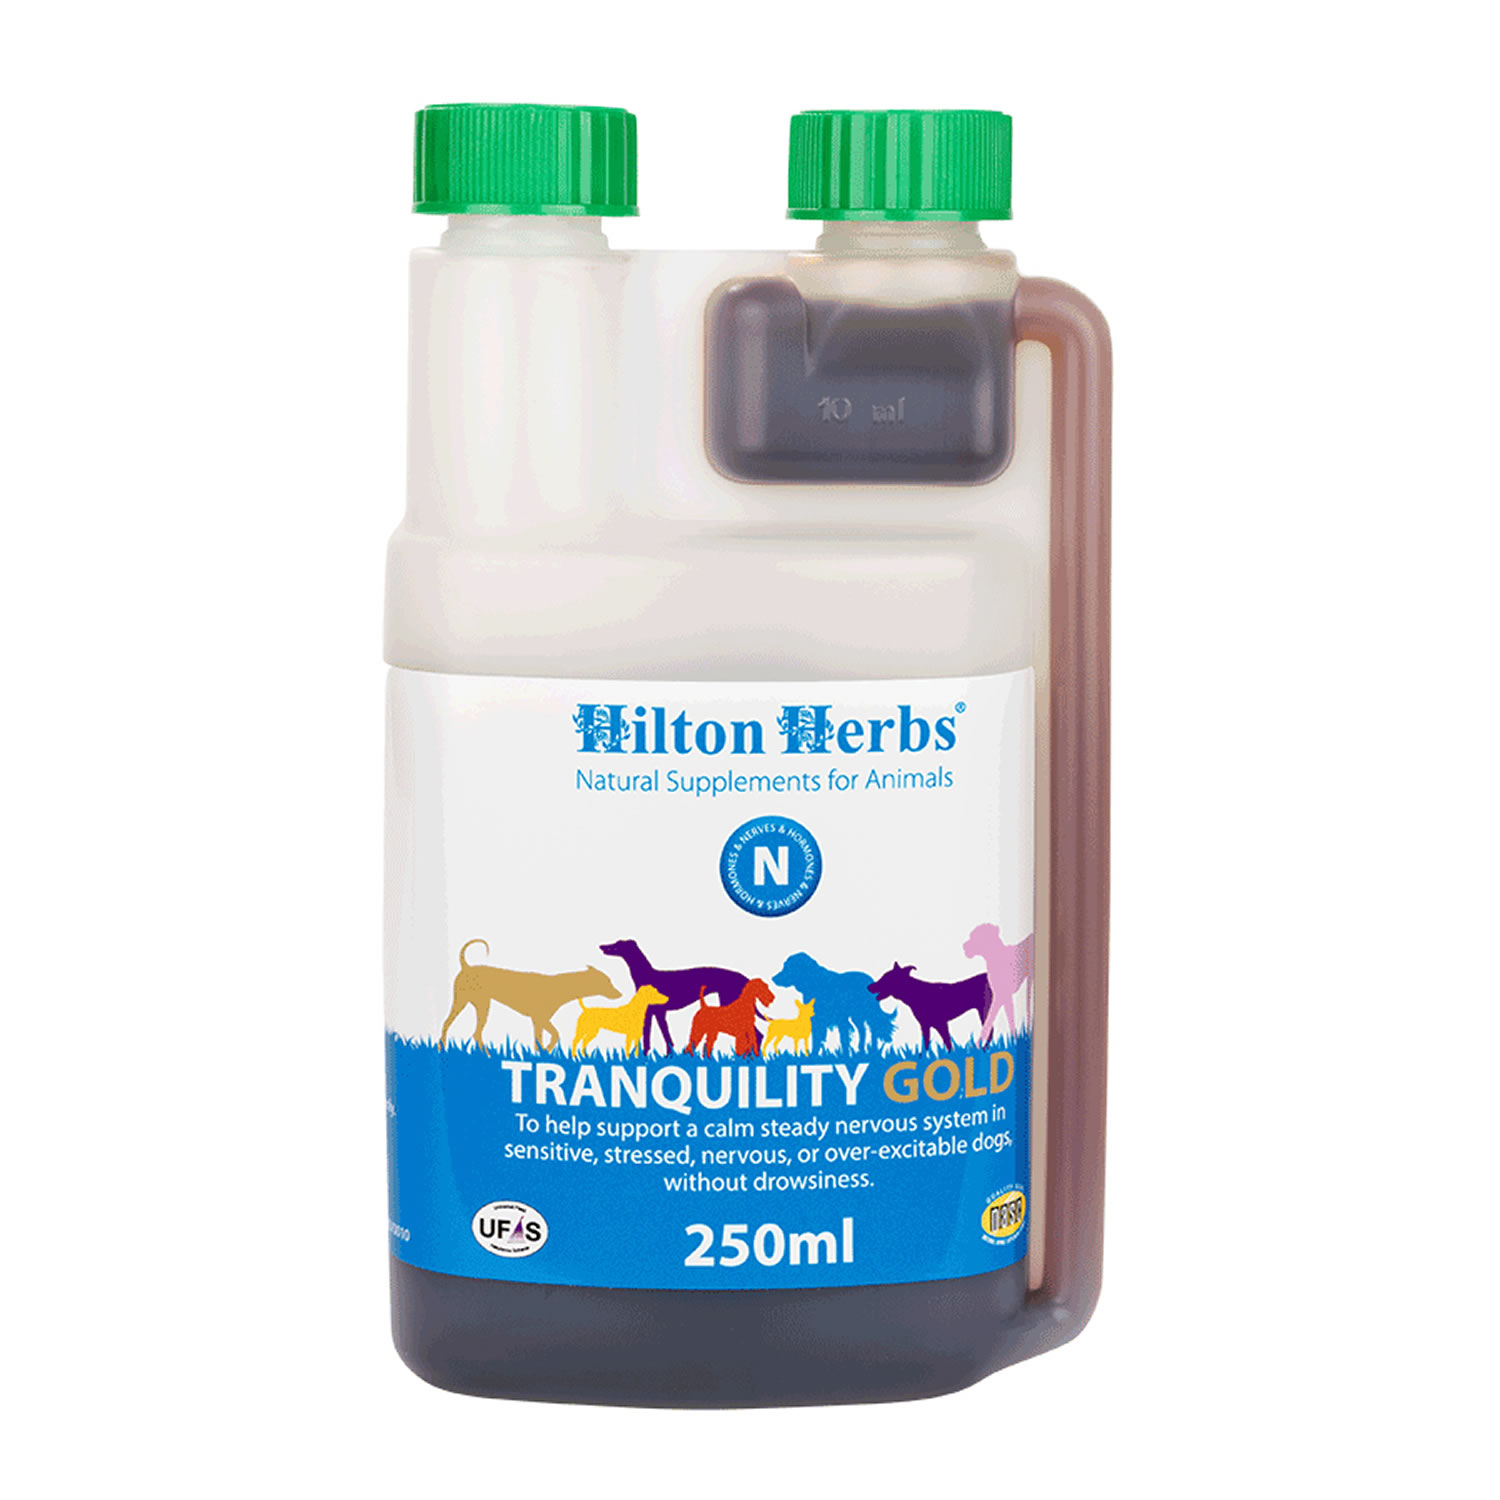 HILTON HERBS CANINE TRANQUILITY GOLD  250 ML